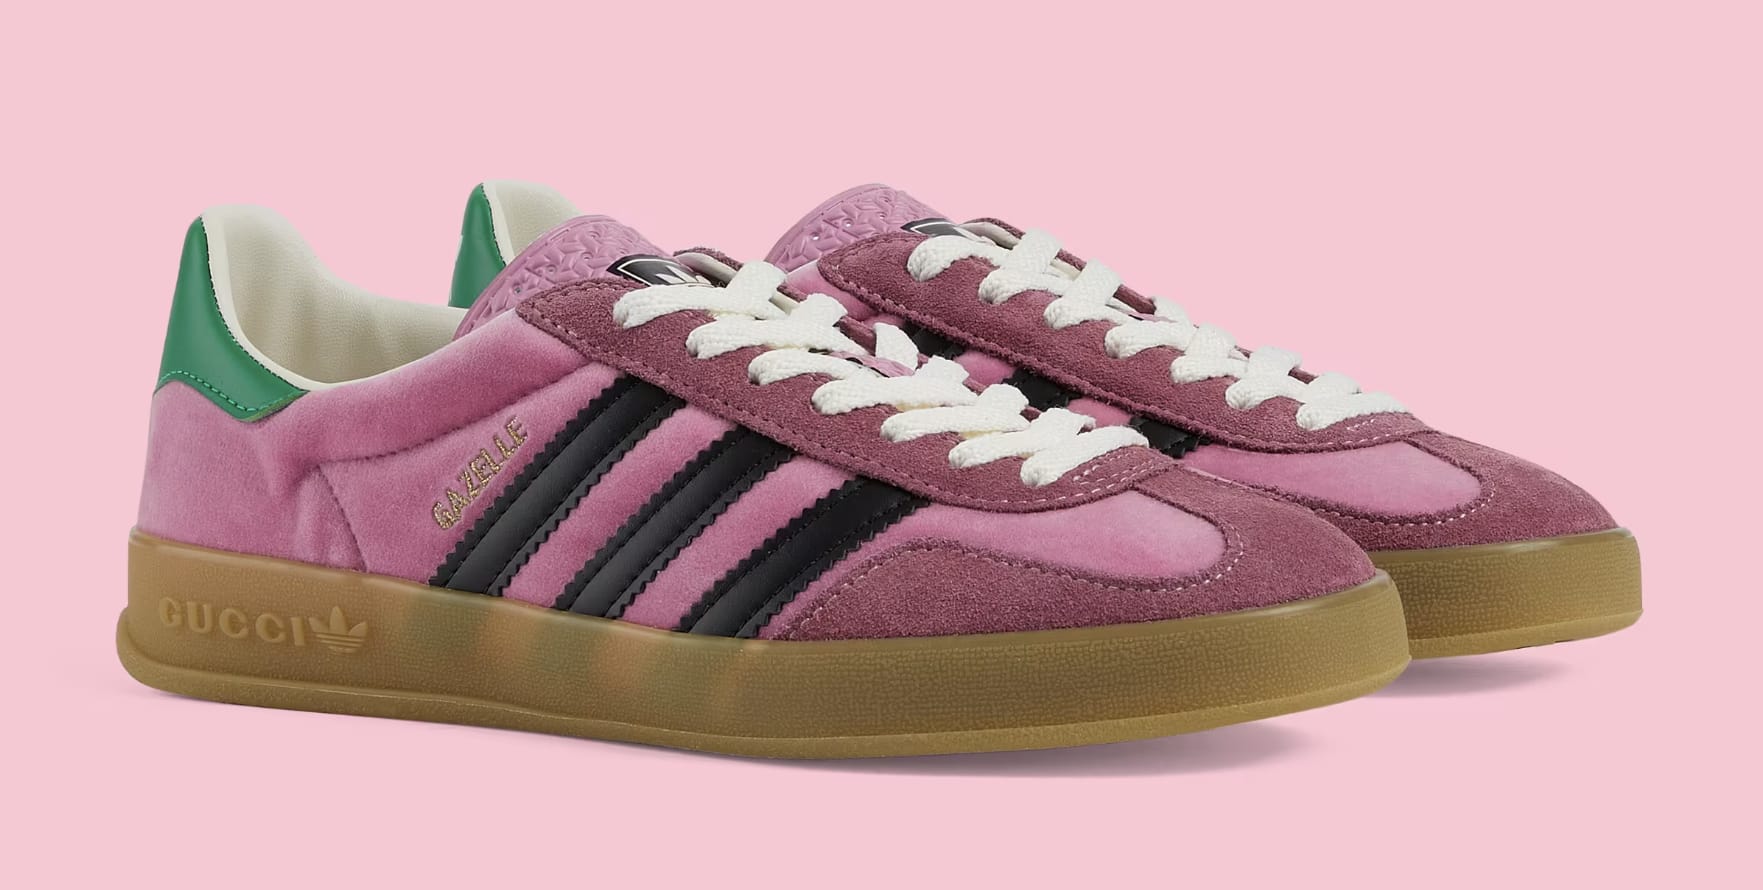 adidas x Gucci Gazelle Collection Release Date June 2022 | Sole